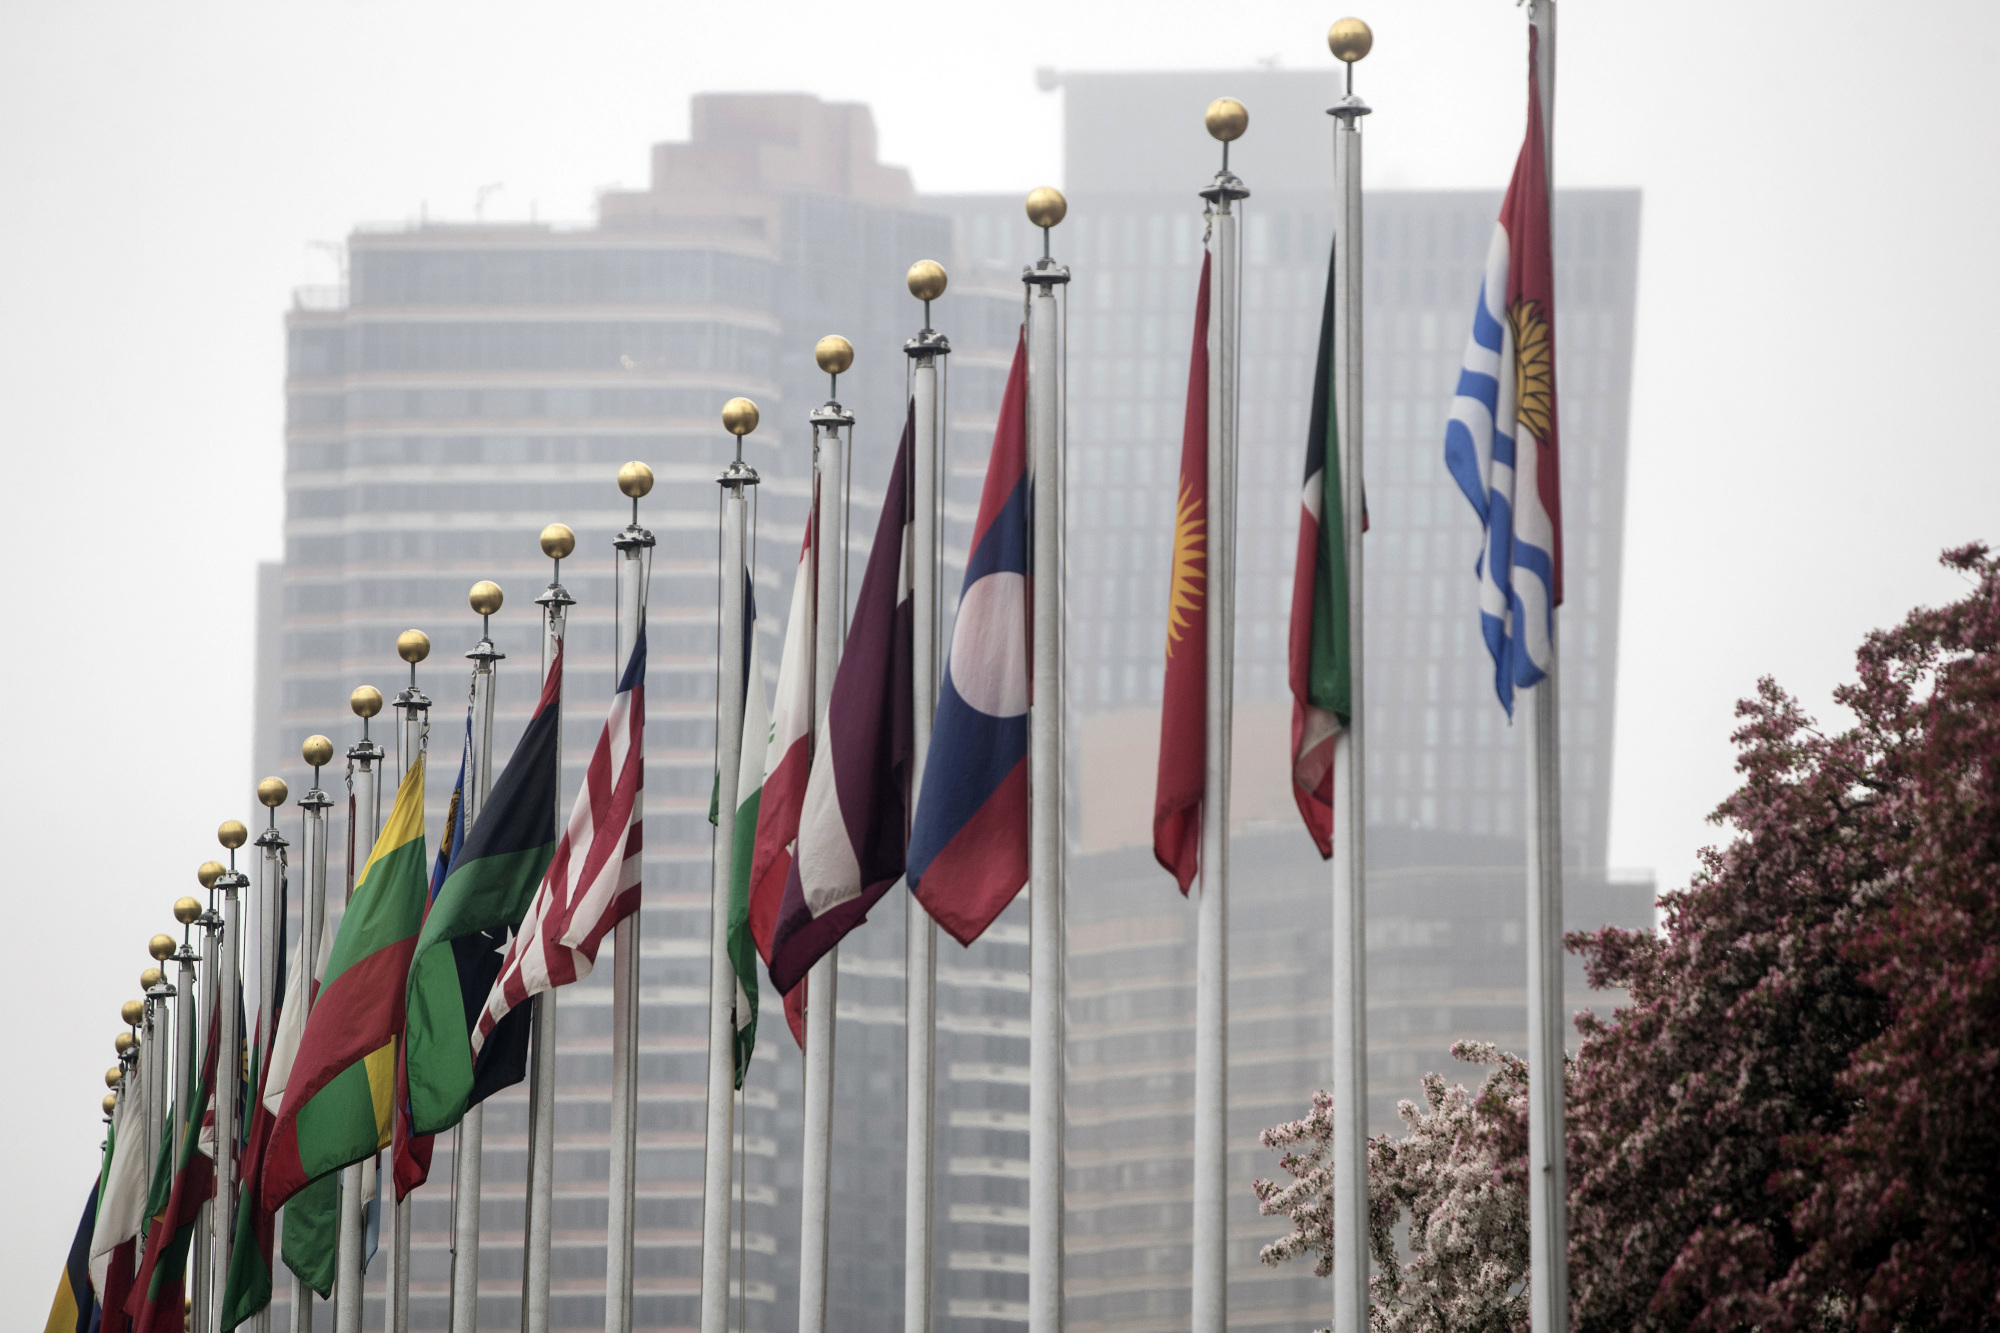 National flags fly outside the secretariat building at the United Nations headquarters in New York. | BLOOMBERG